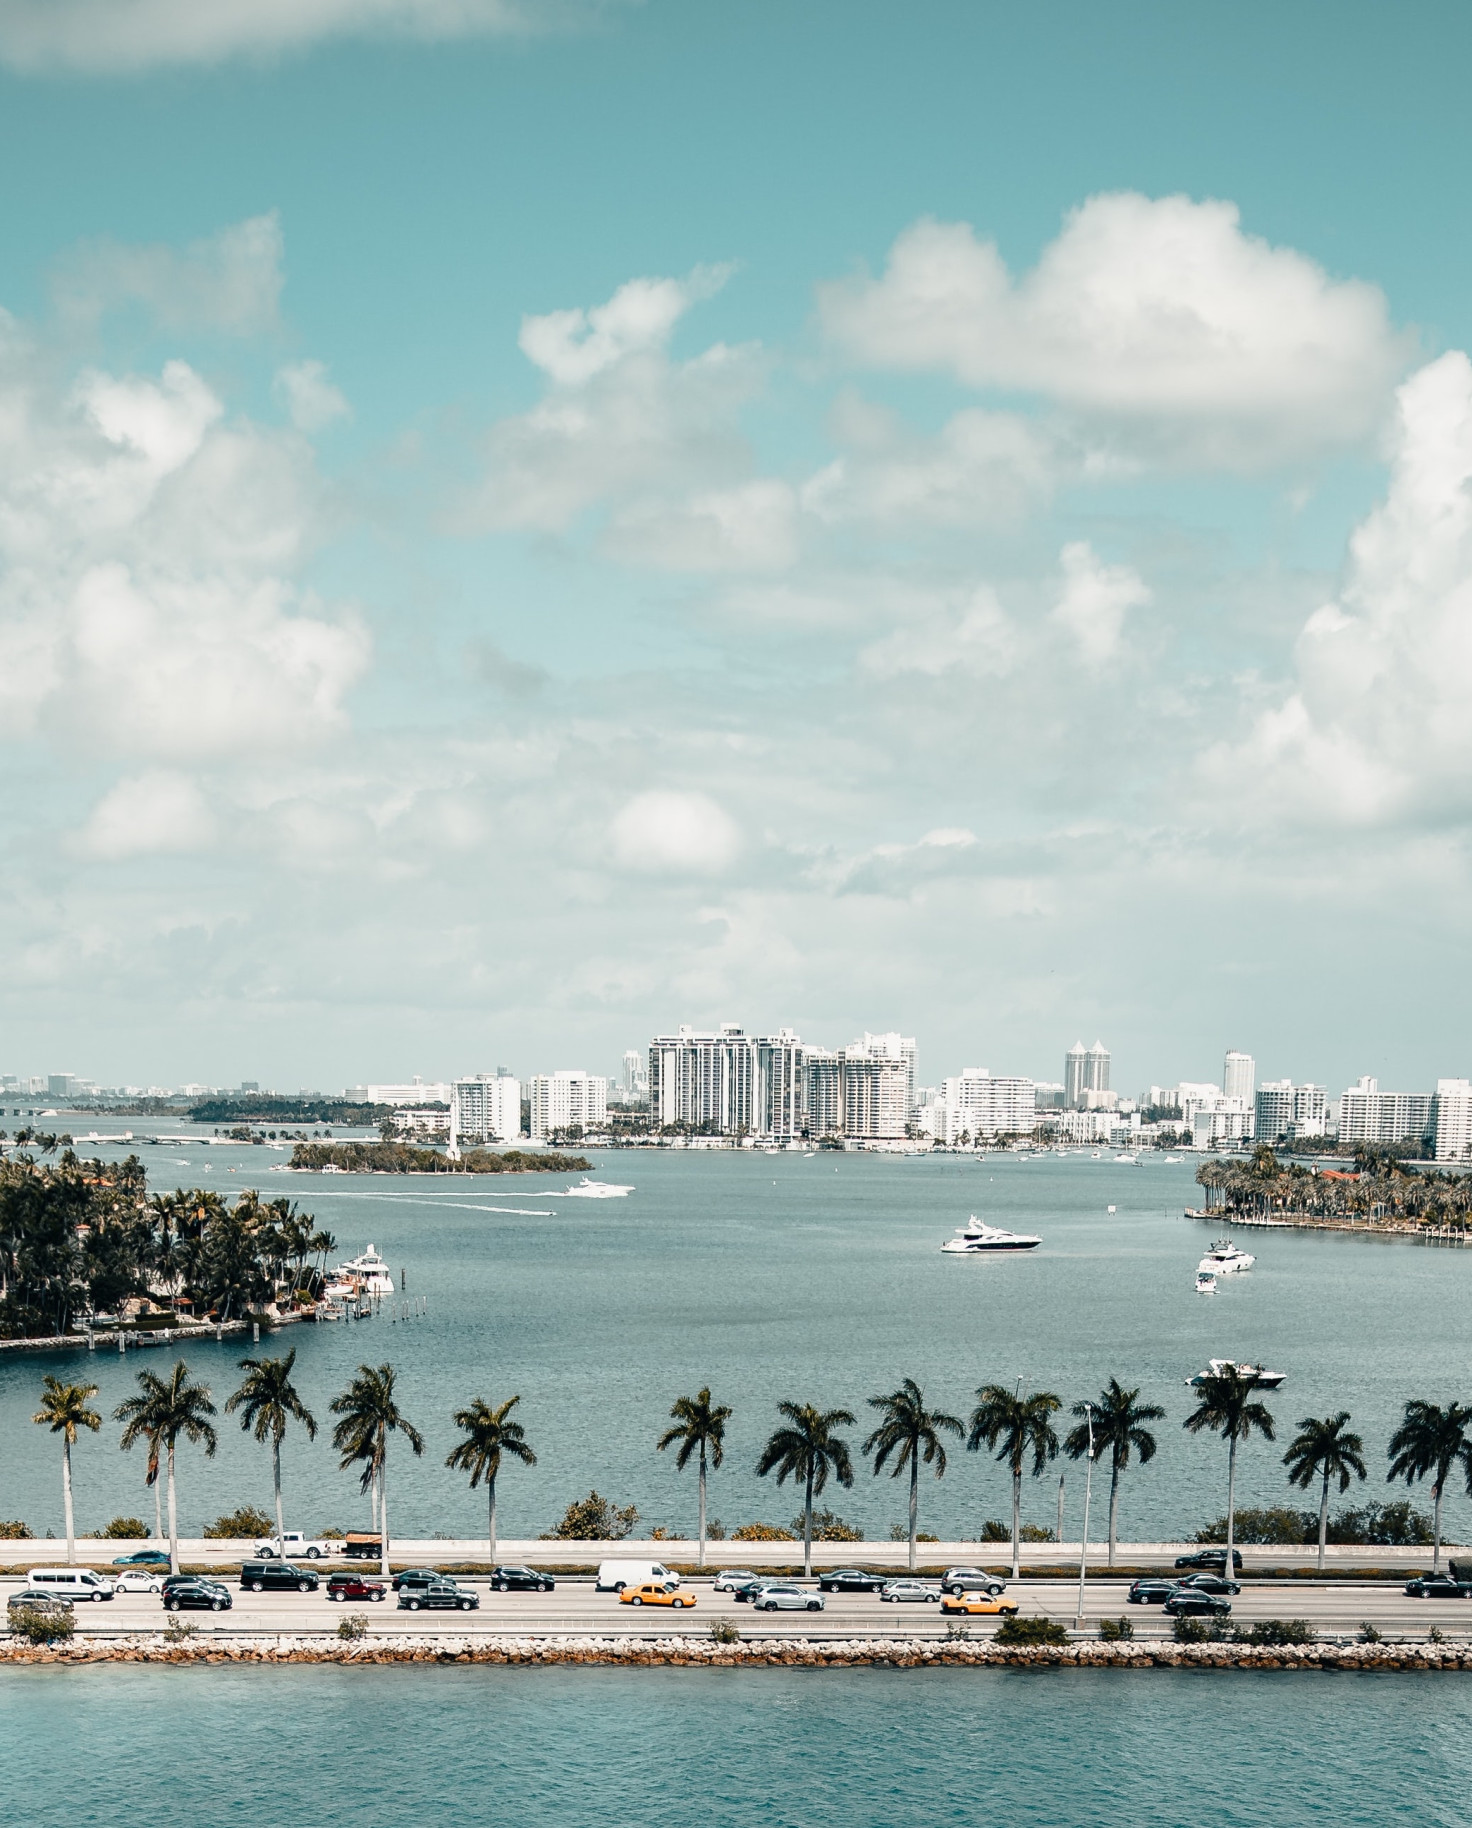 Advisor - 72 Hours in South Beach: Food & Culture Guide